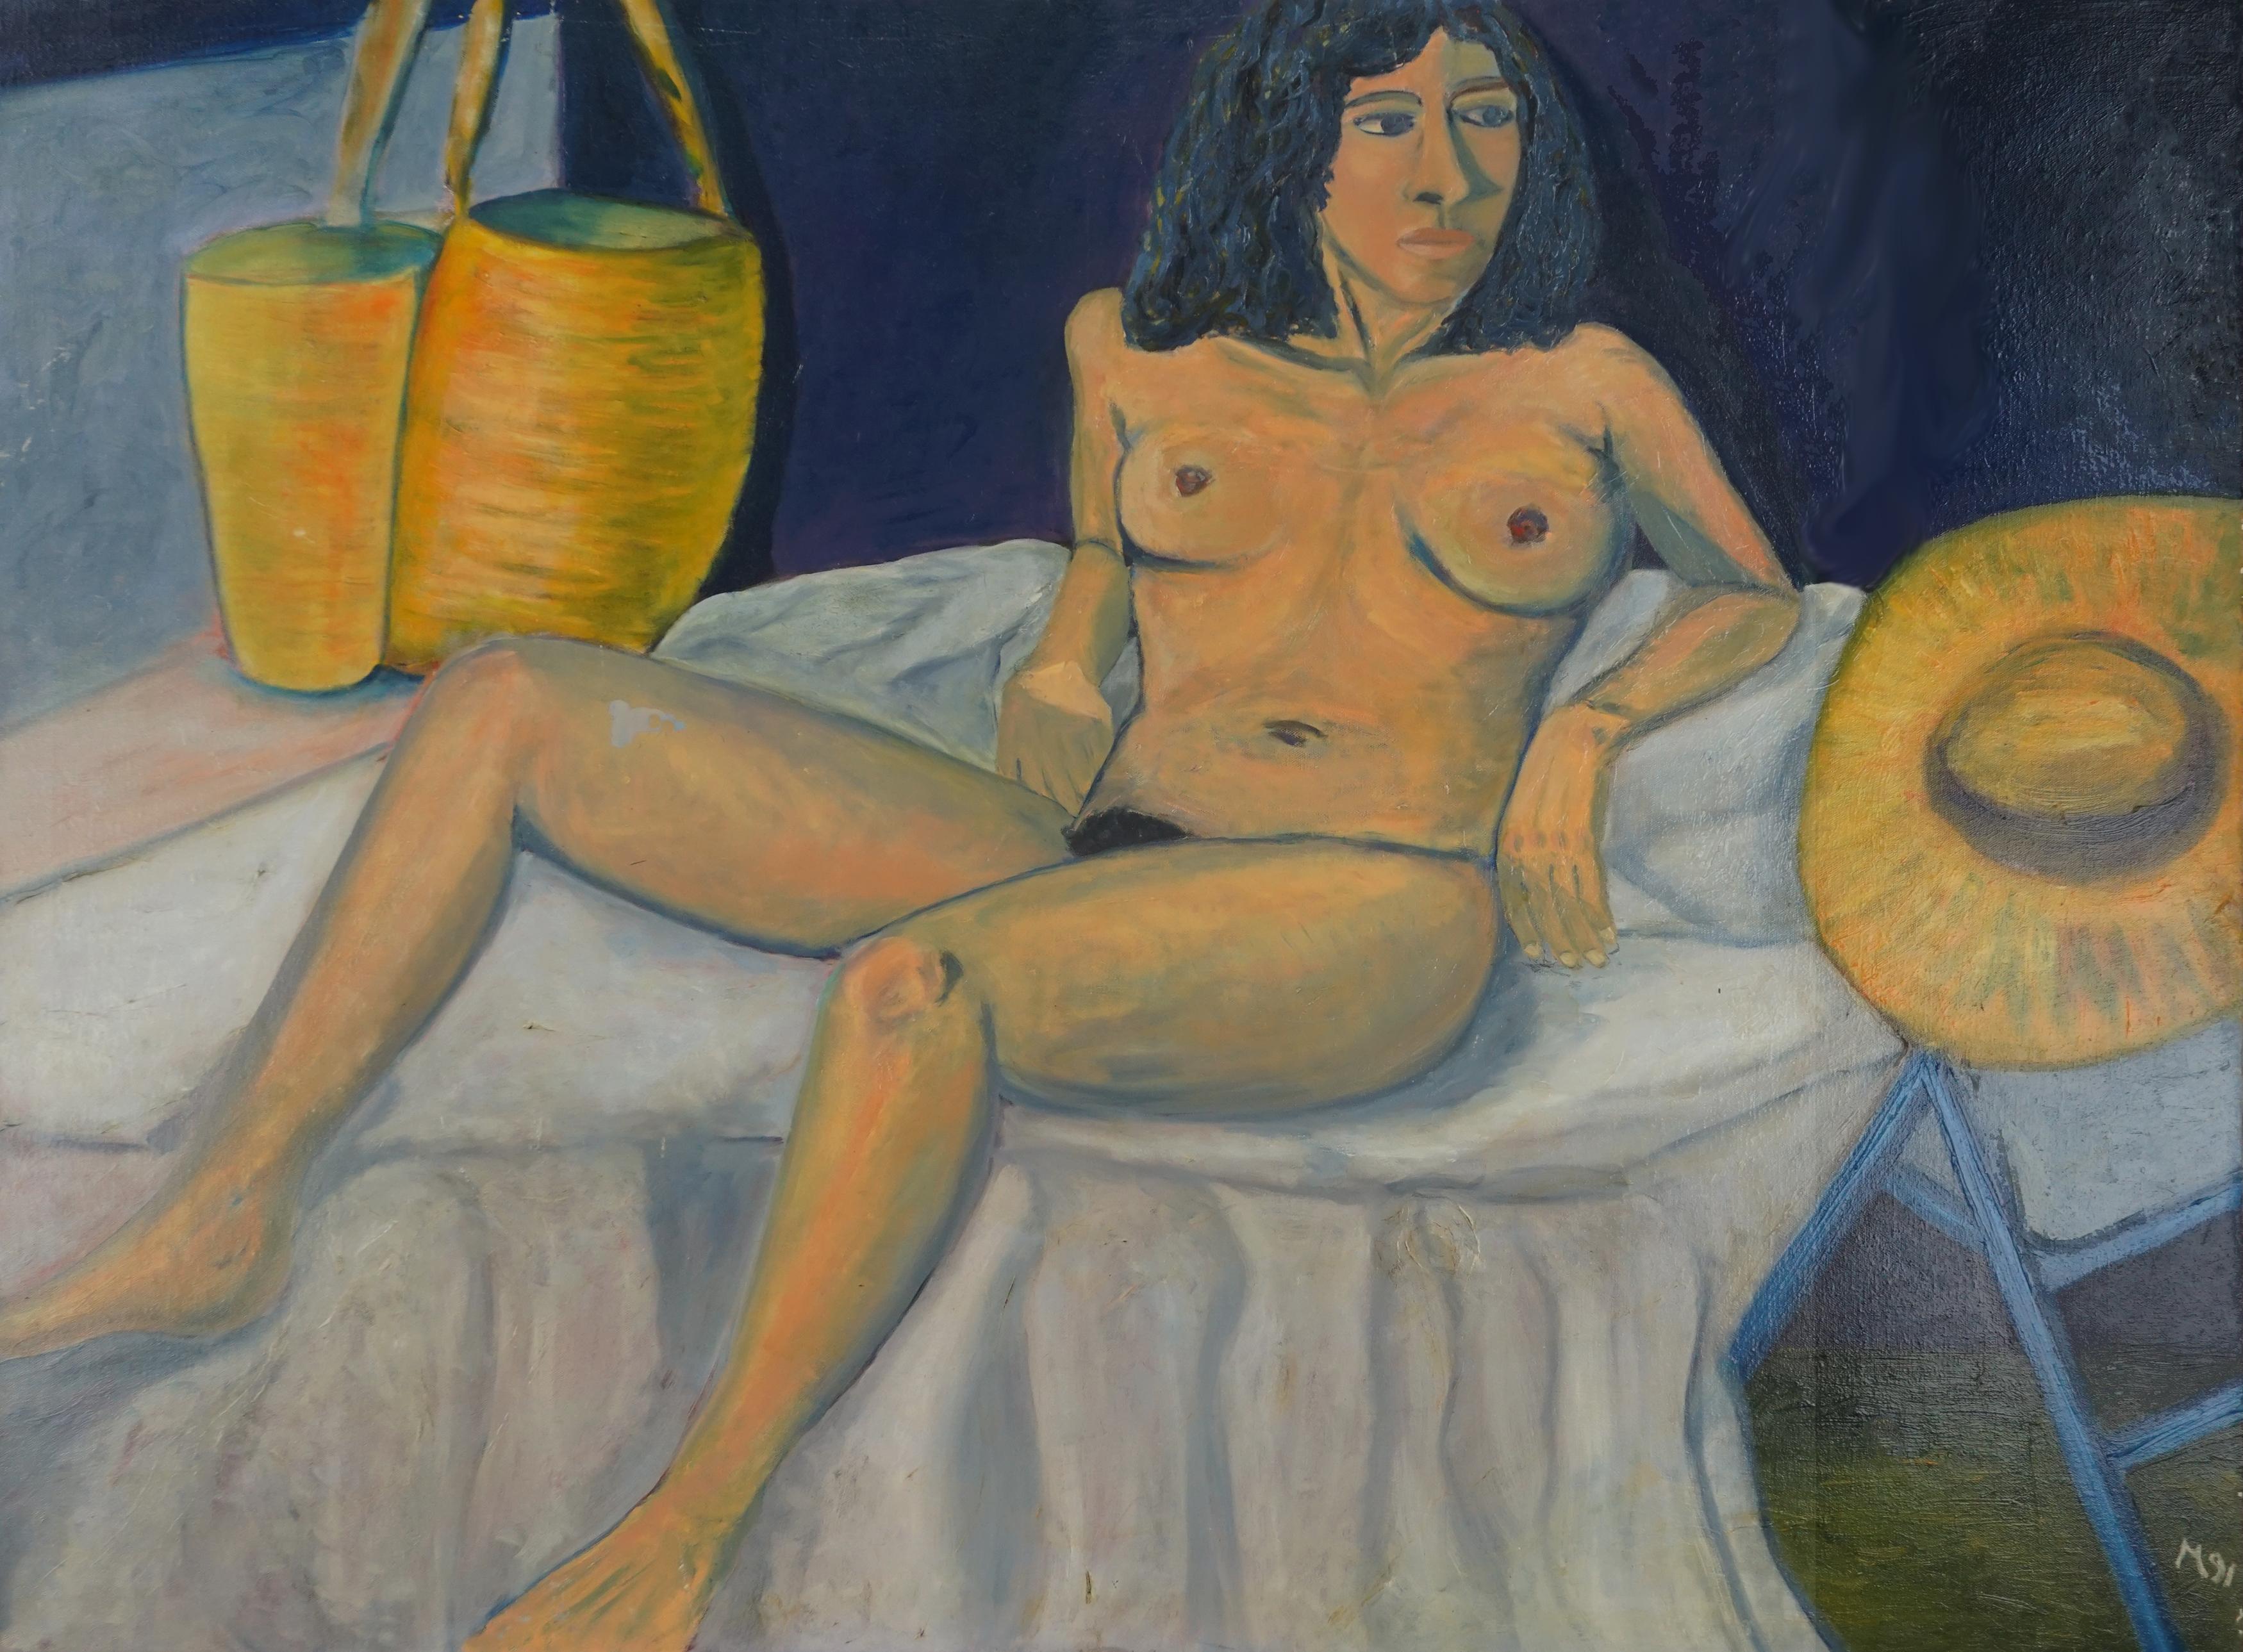 Unknown Nude Painting - "The Model That Not My Wife" Vintage Bay Area Figurative